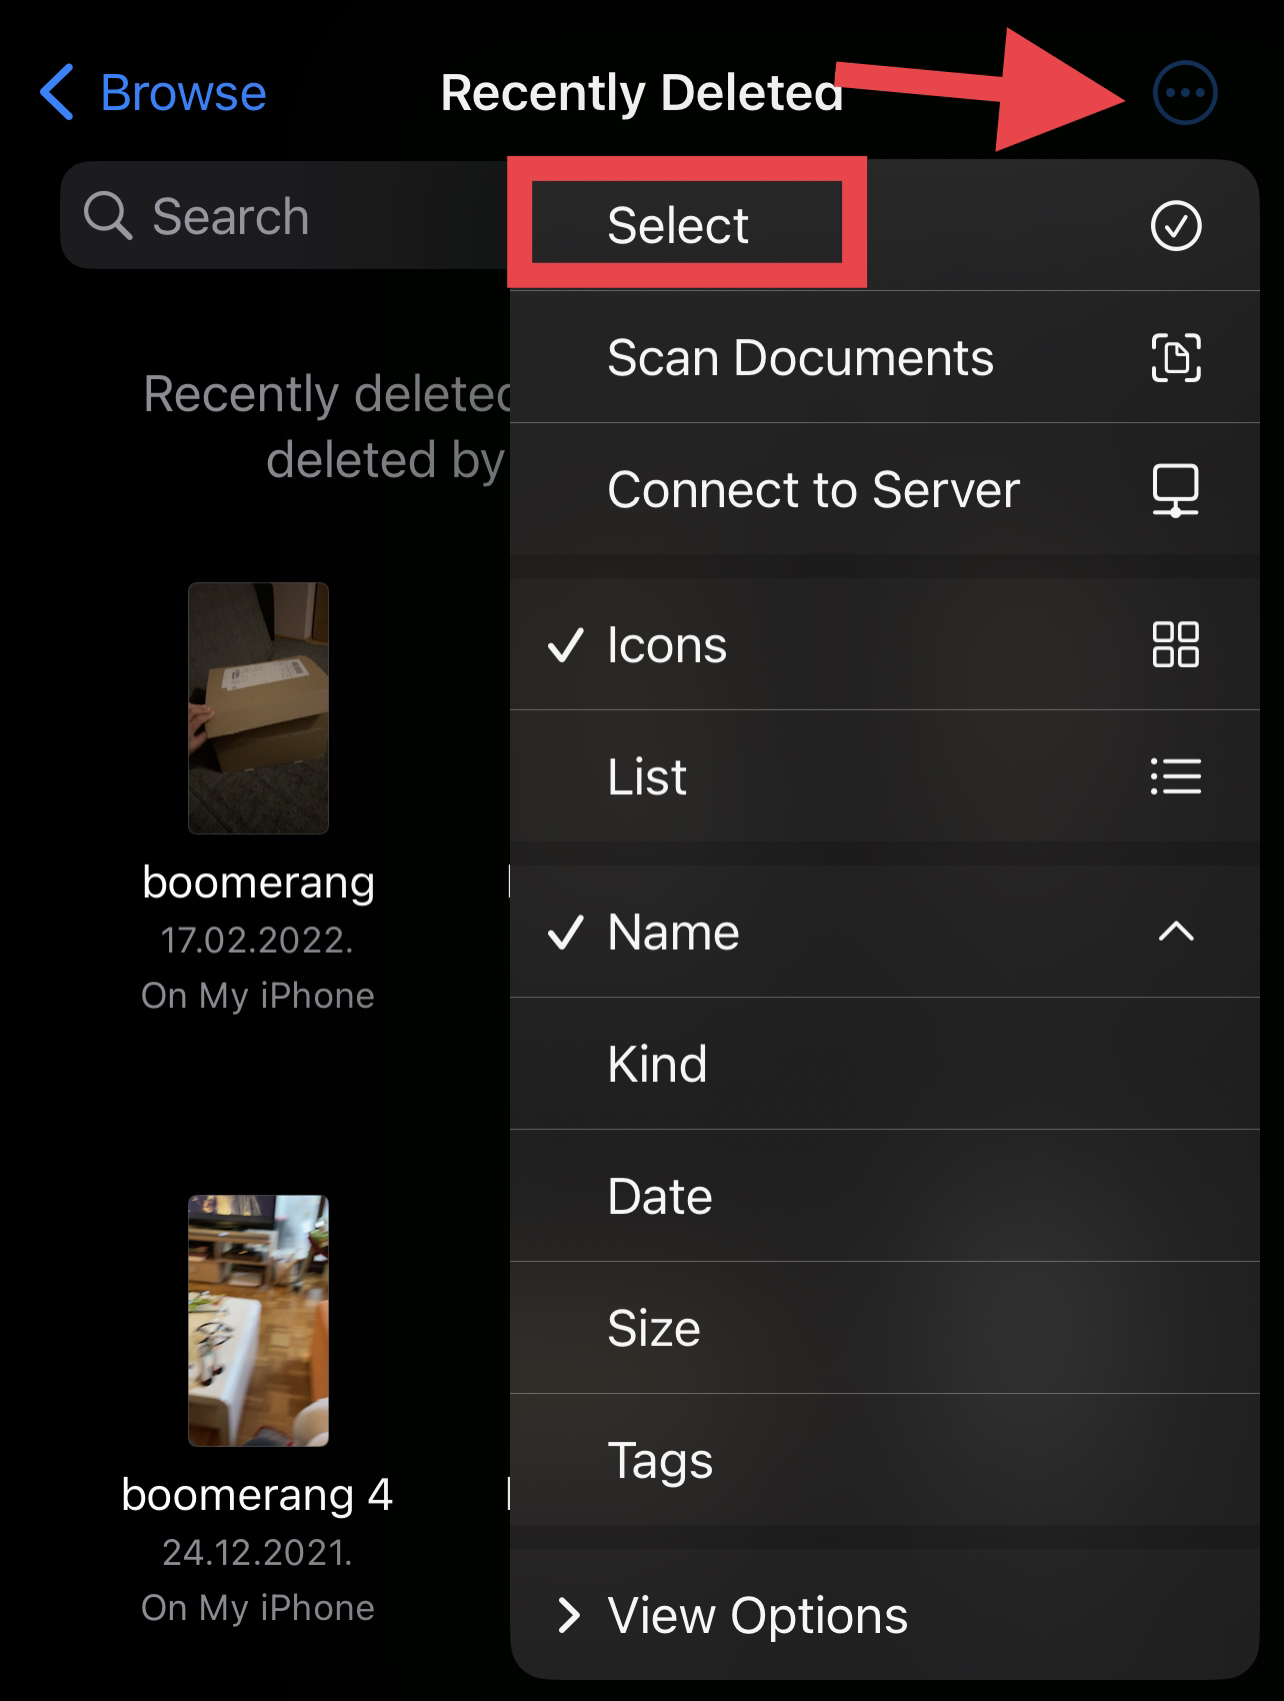 select files on recently deleted